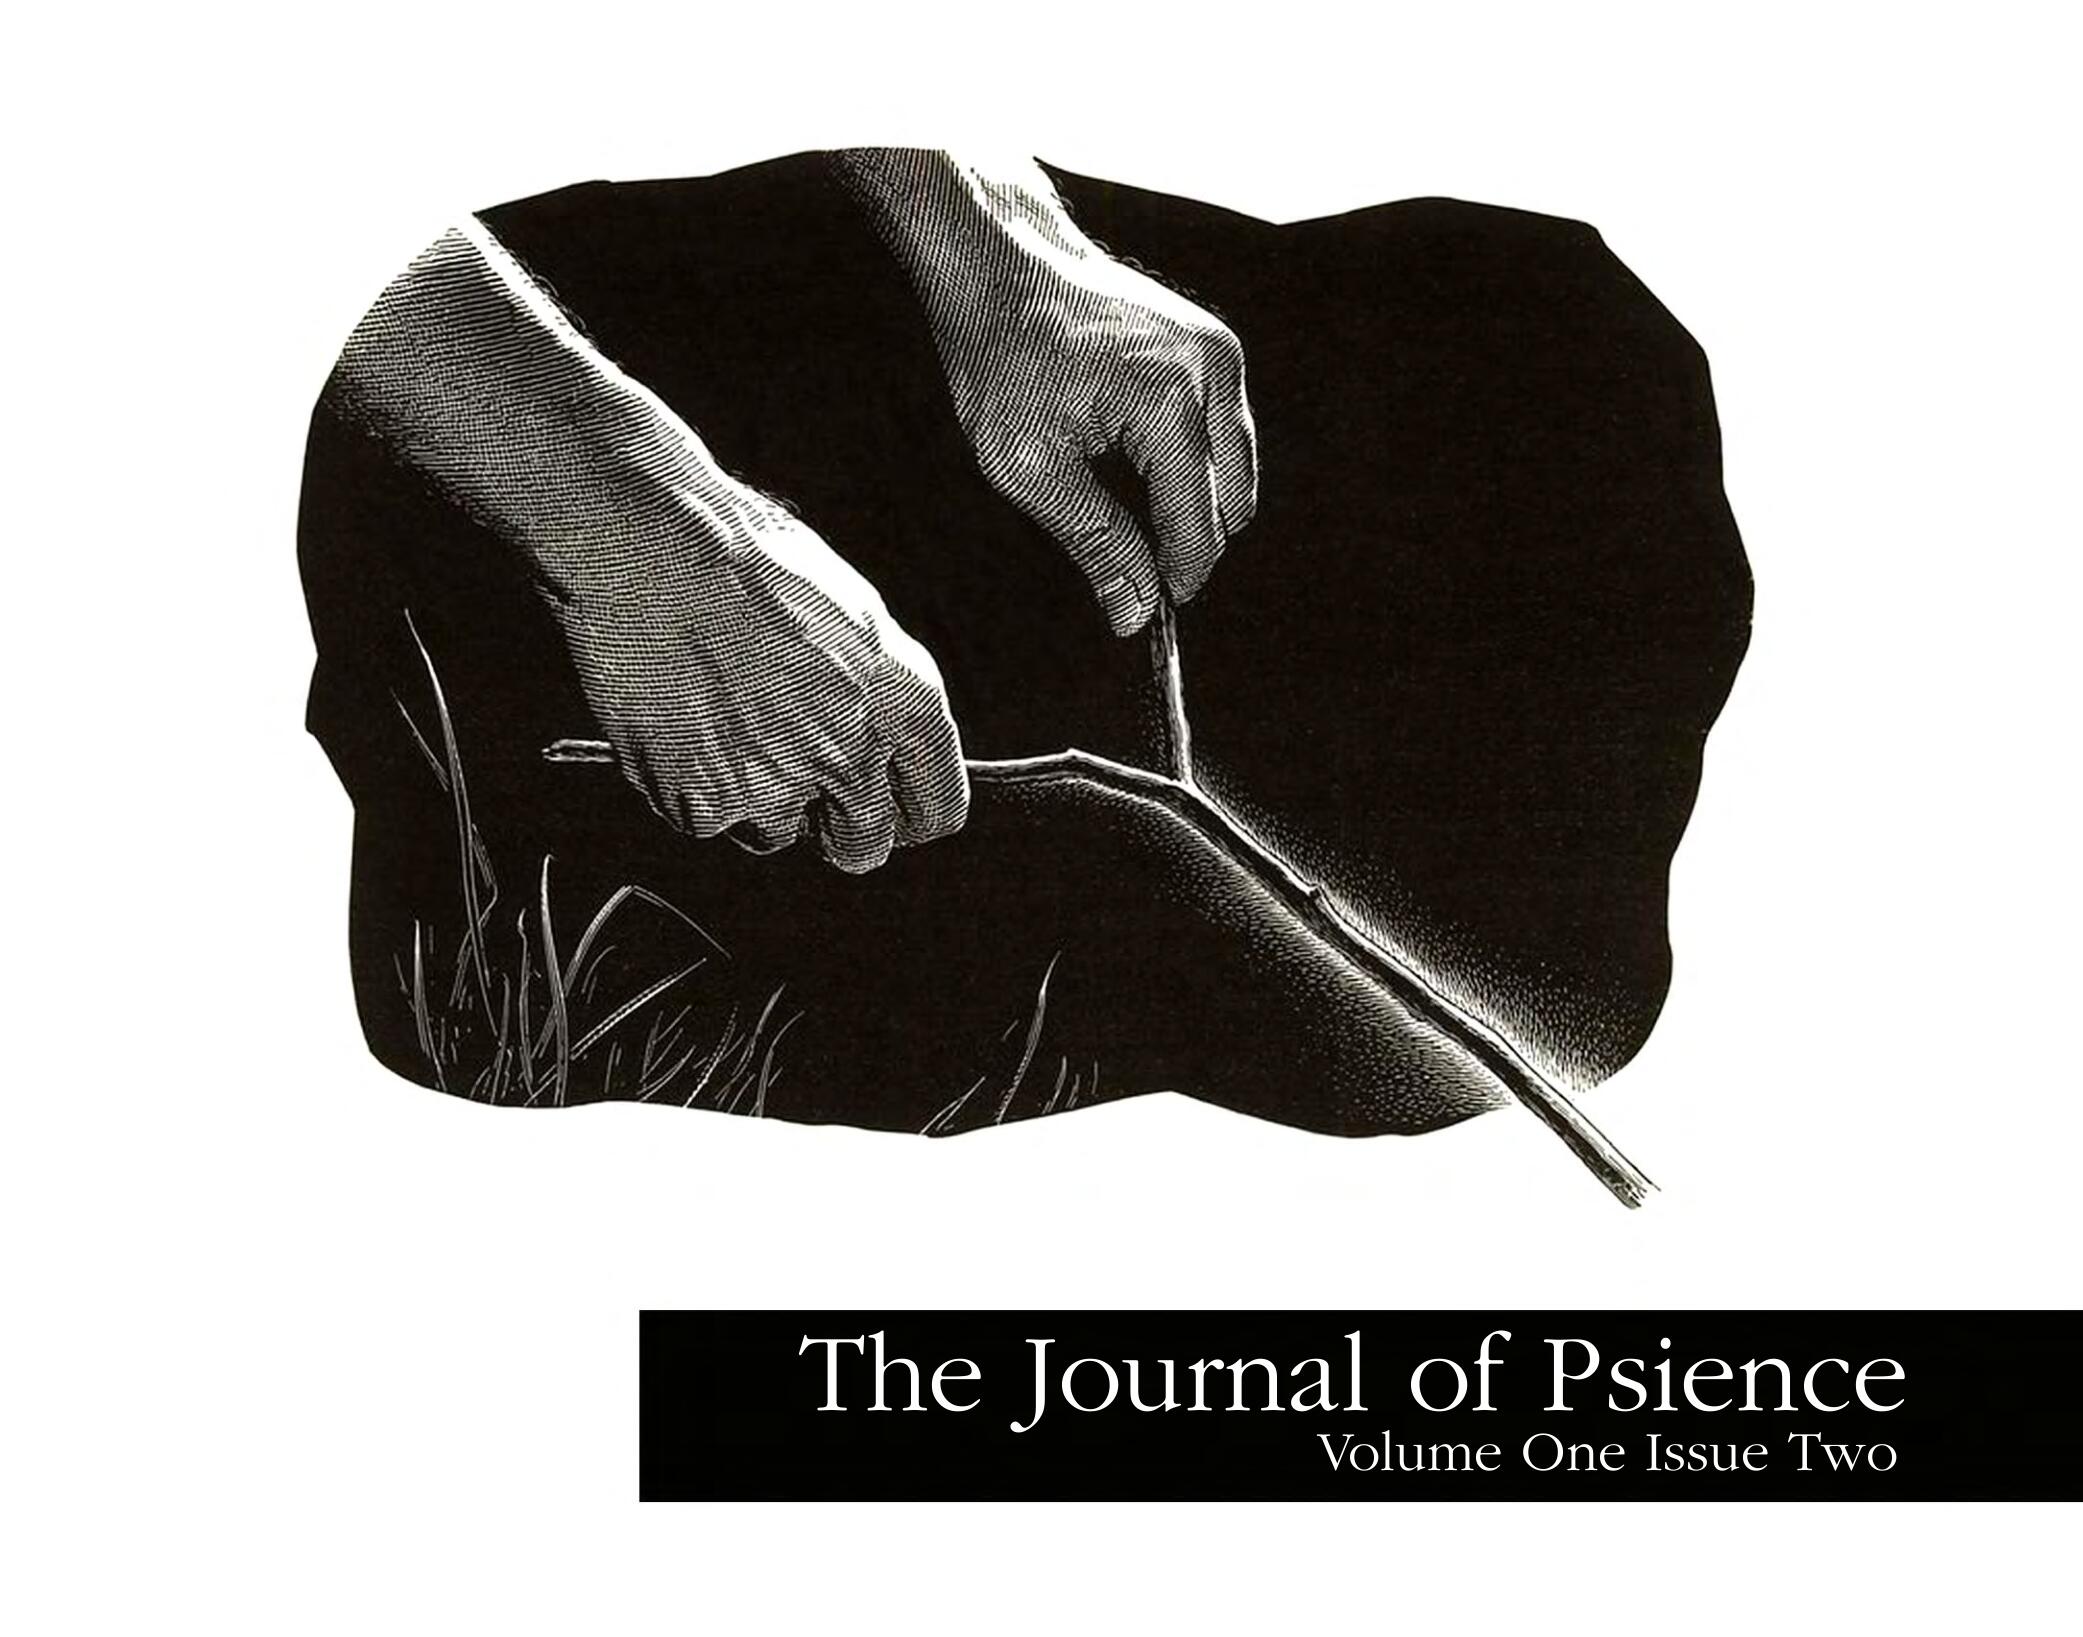 Michael Weber - The Journal of Psience - Volume 1 Issue 2